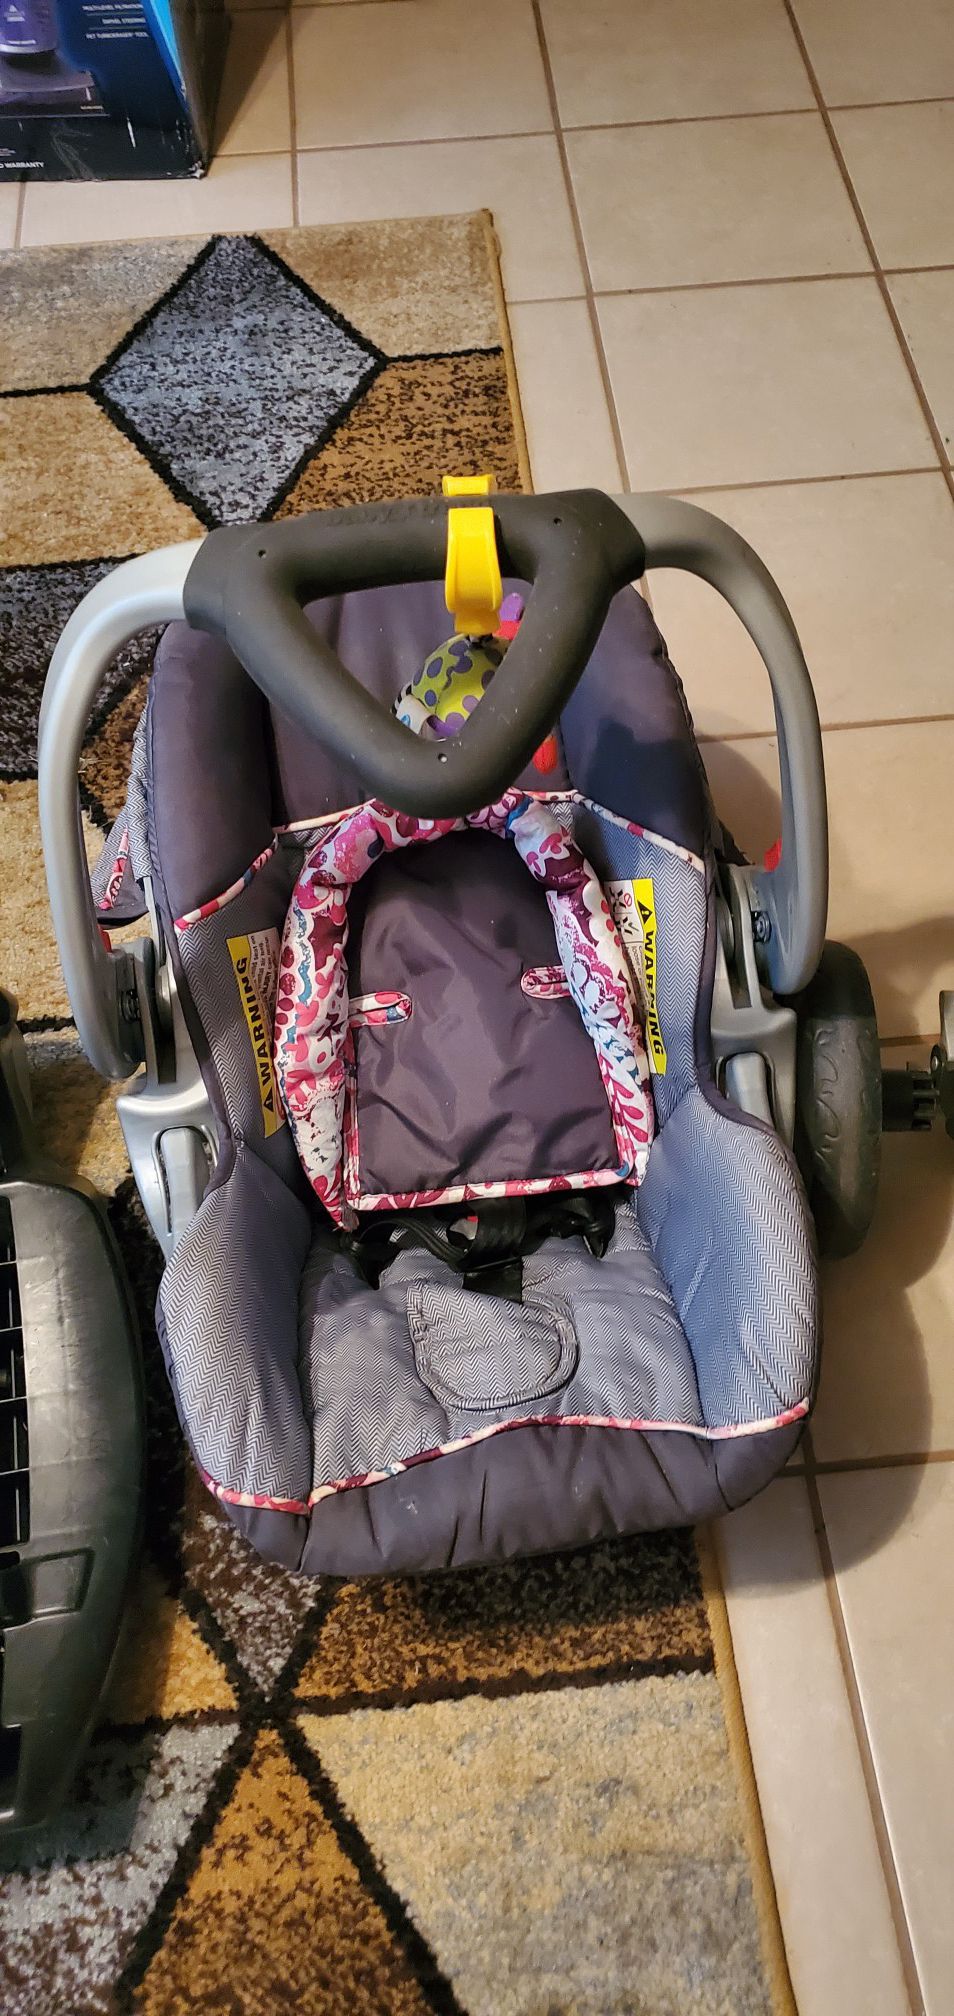 Baby Trend travel system for infants